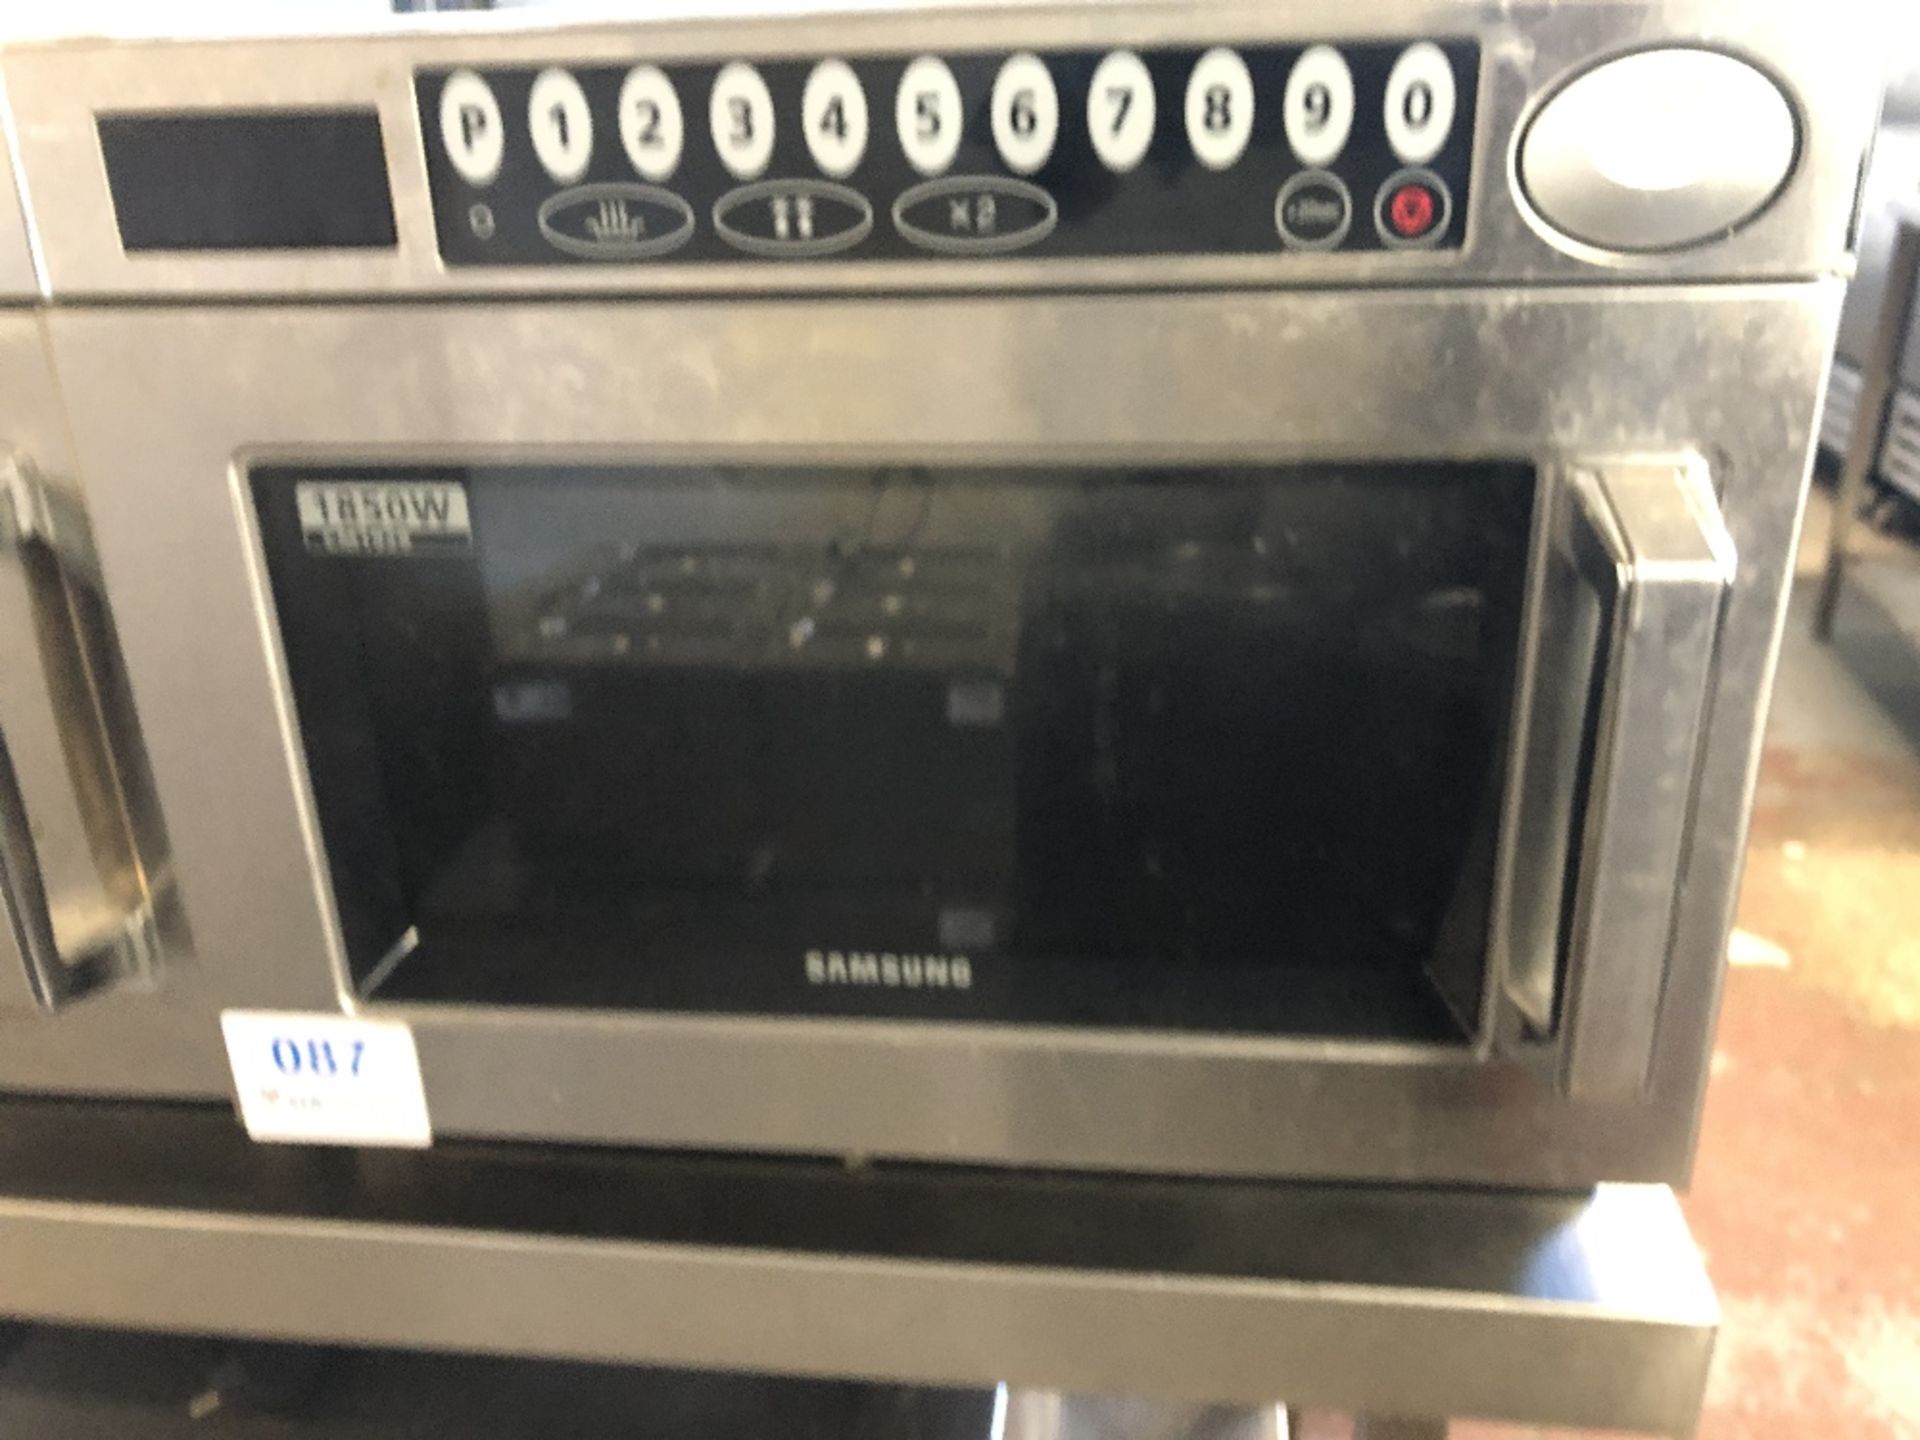 Samsung CM1929 26Ltr Programmable Commercial Stainless Steel Microwave Oven